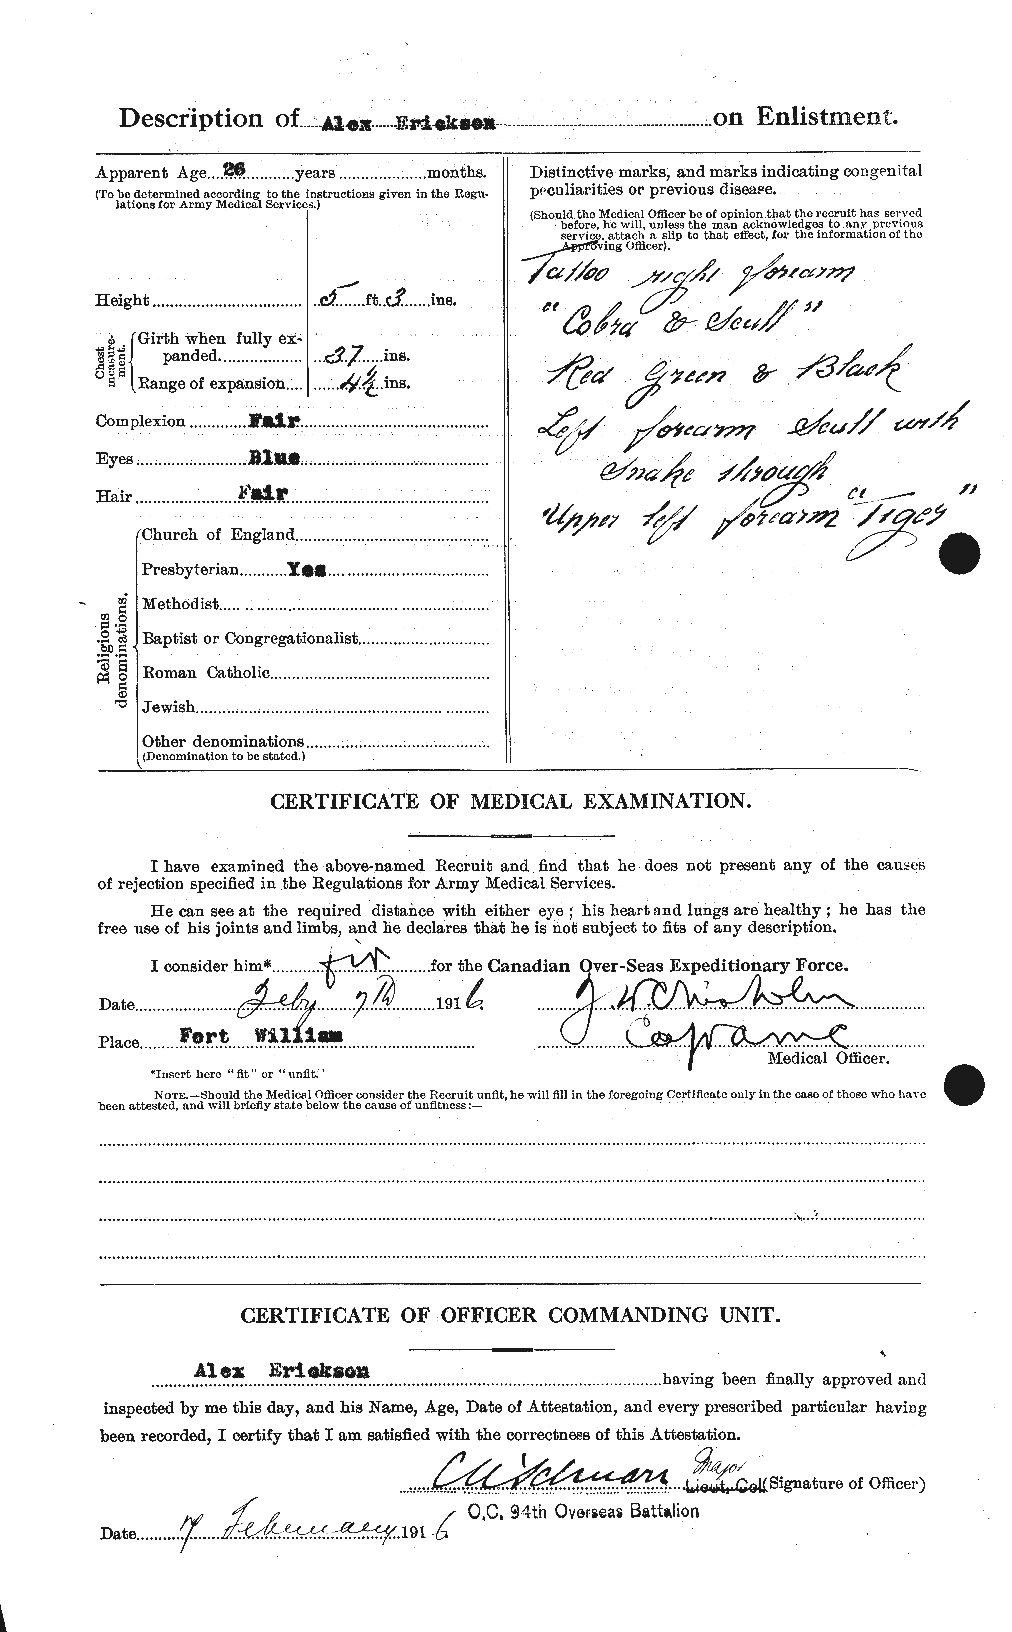 Personnel Records of the First World War - CEF 313337b